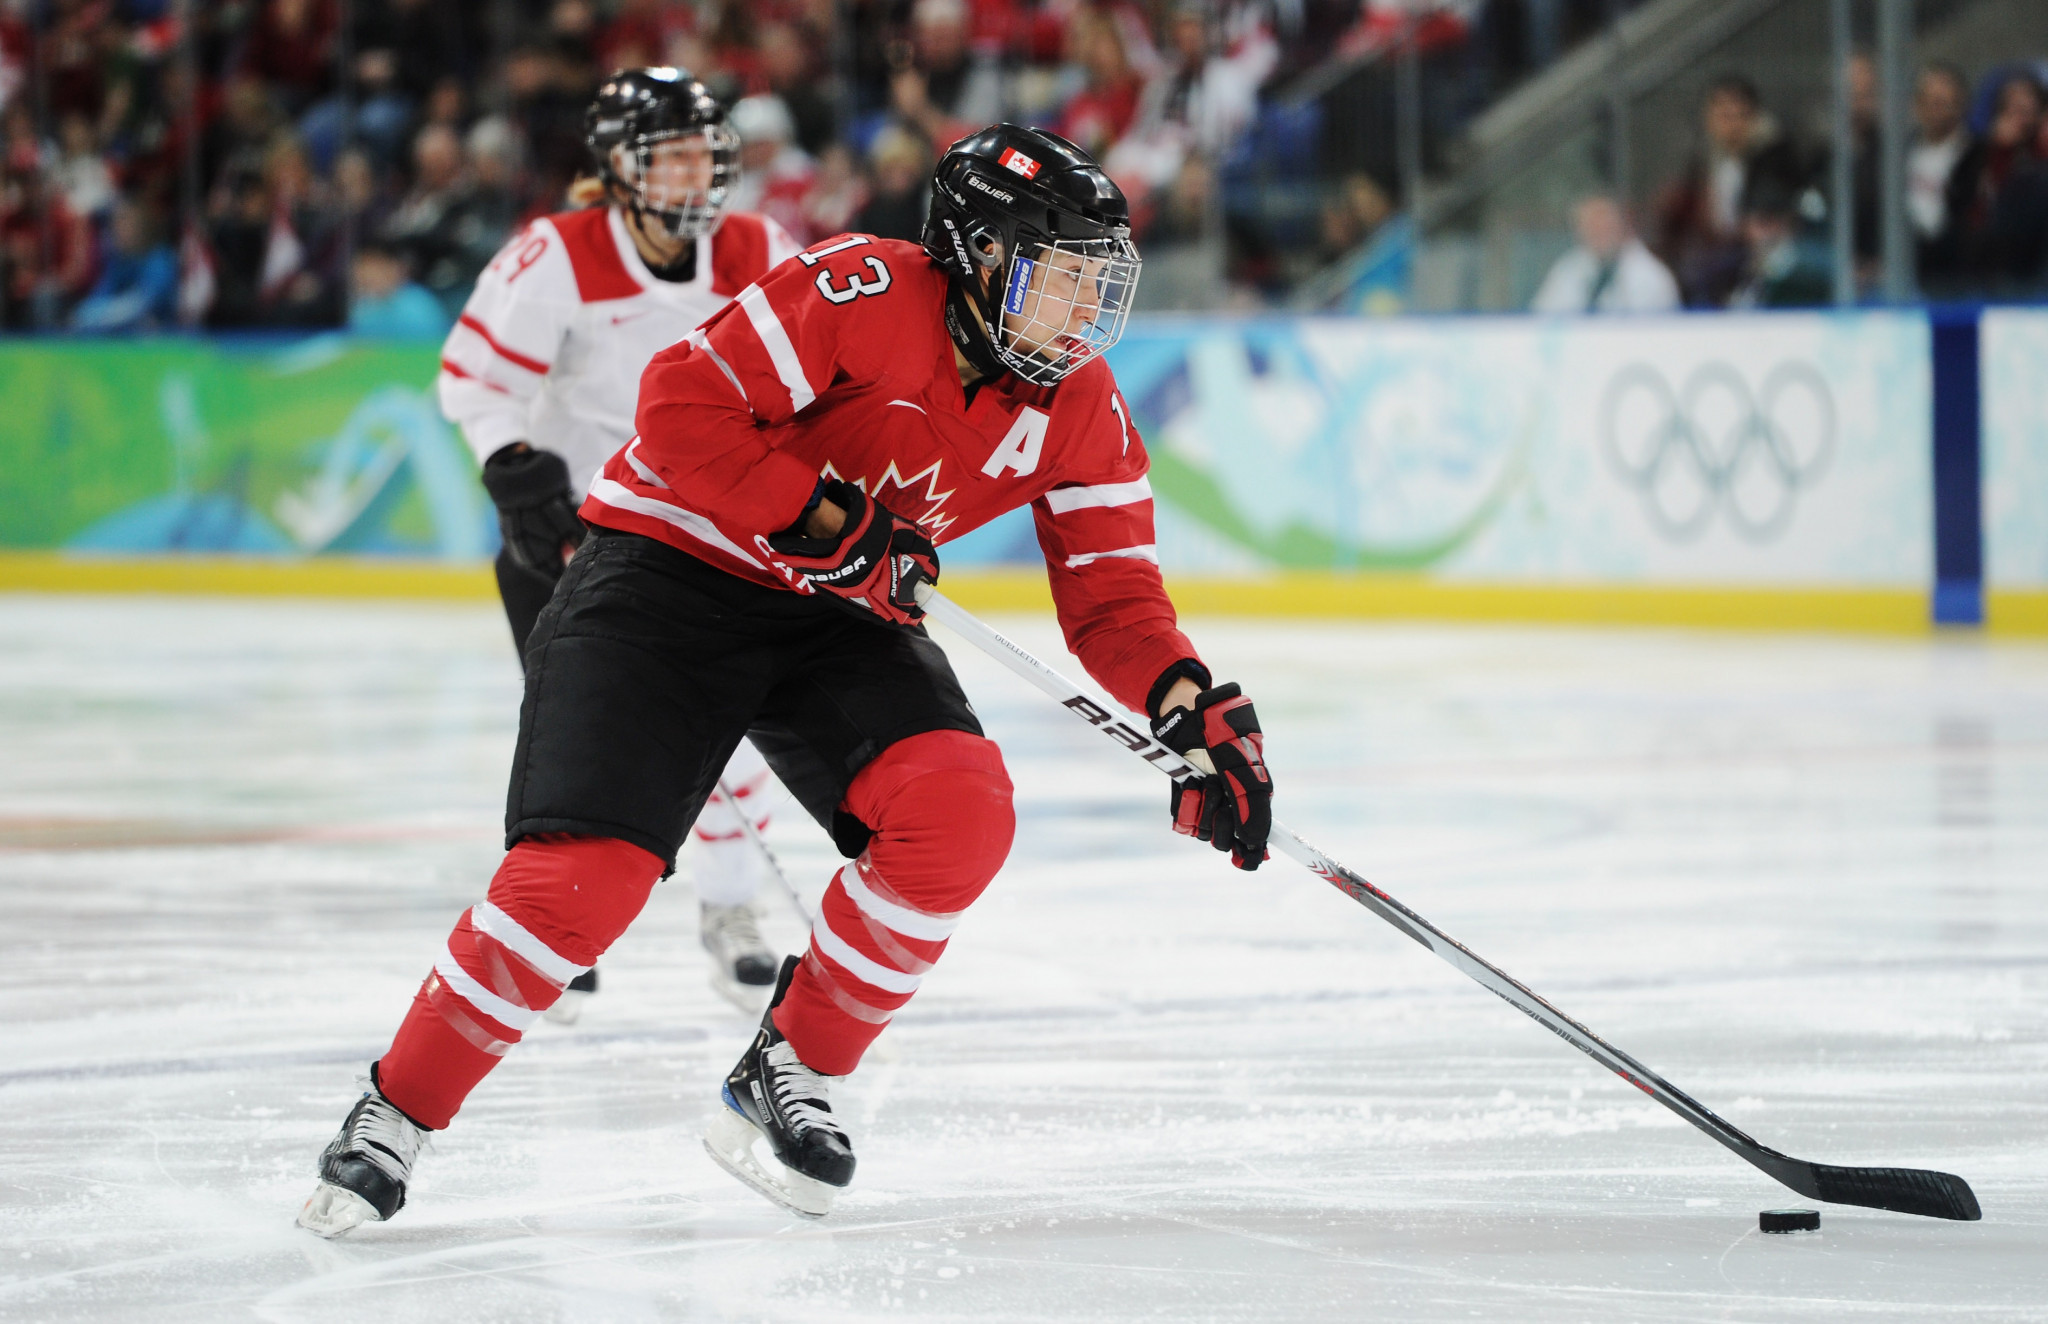 Caroline Ouellette helped Canada win four straight women's ice hockey Olympic gold medals from 2002 to 2014 ©Getty Images